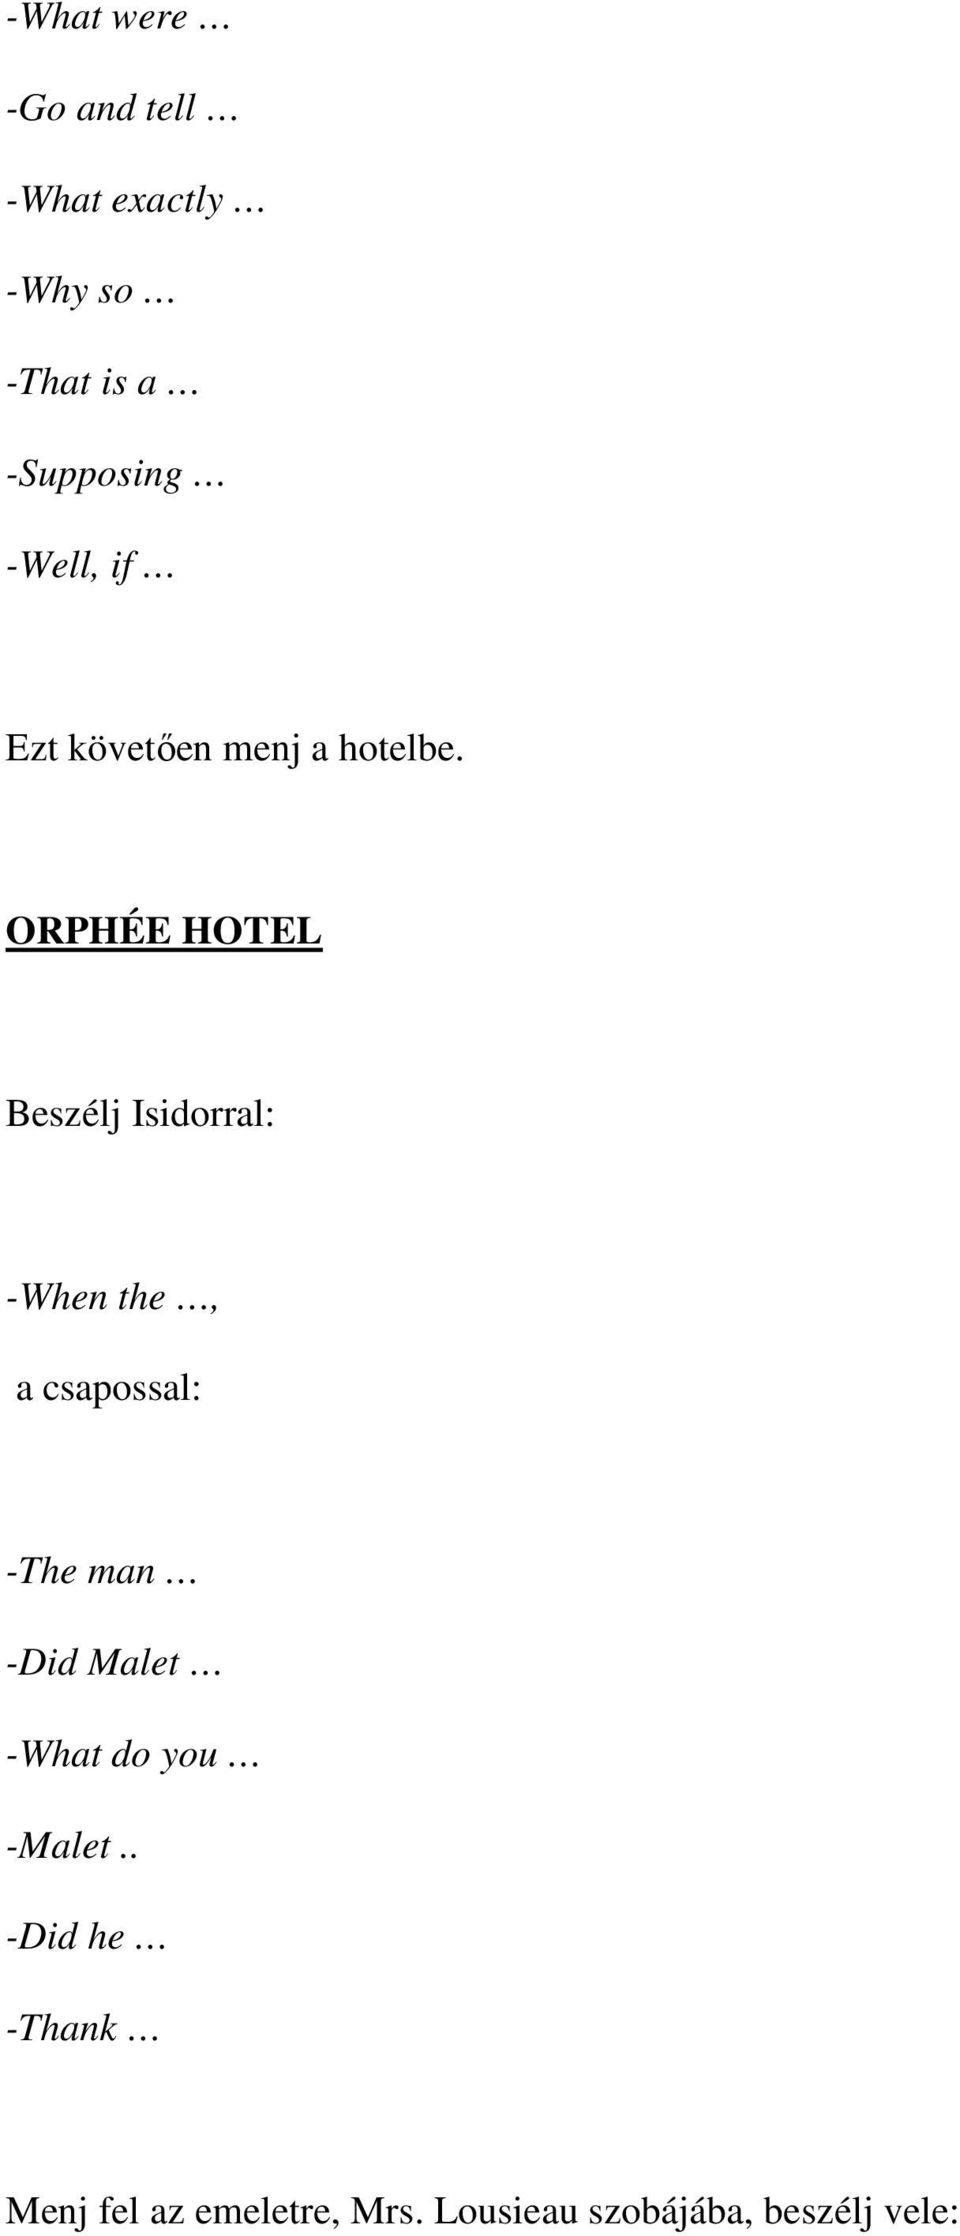 ORPHÉE HOTEL Beszélj Isidorral: -When the, a csapossal: -The man -Did